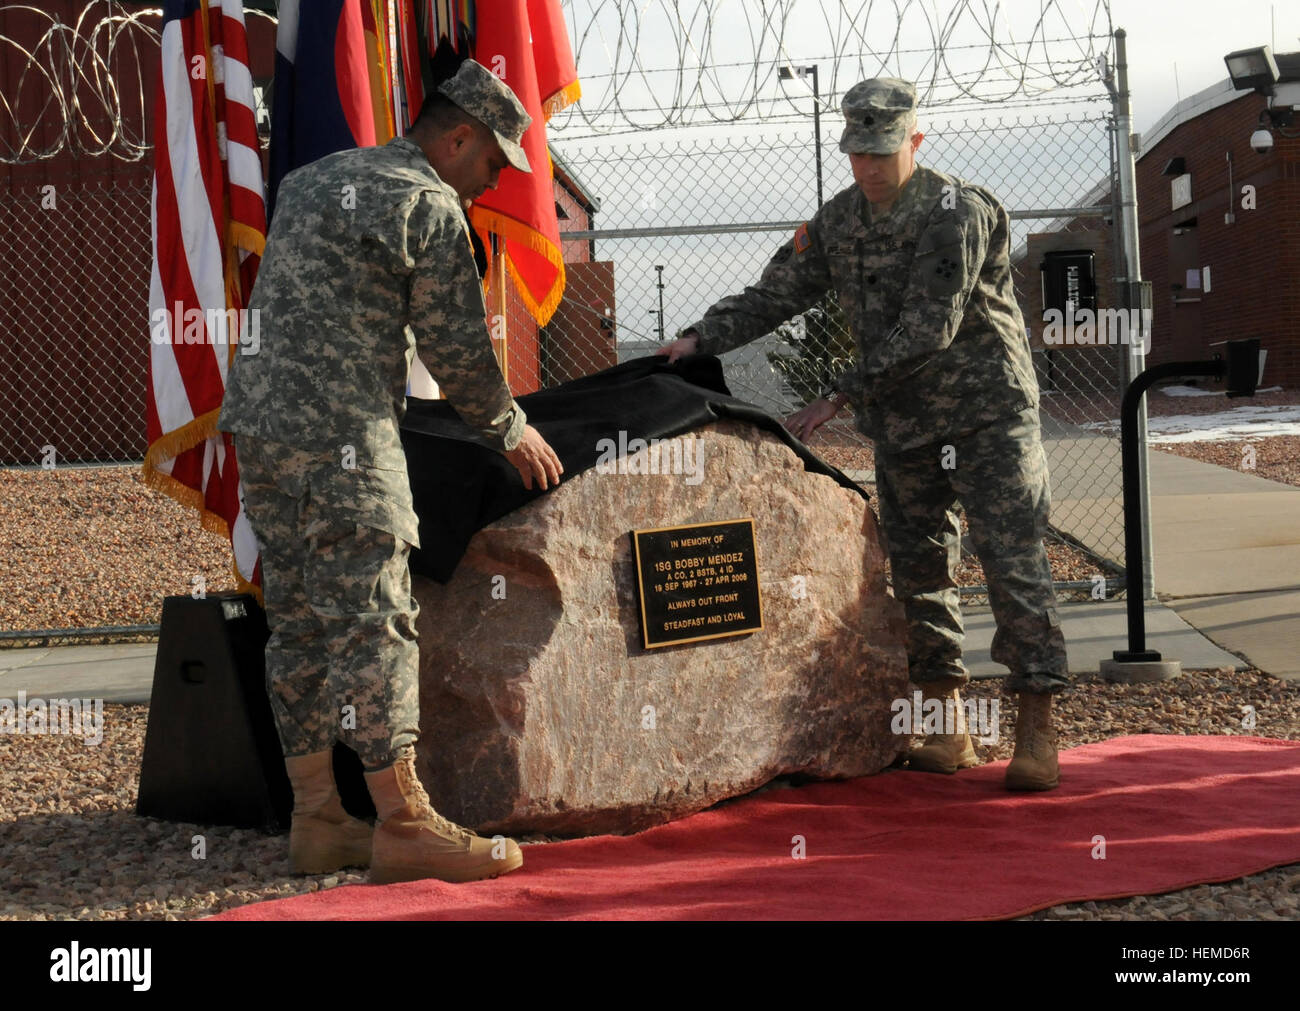 Brig. Gen. Ryan Gonsalves, left, deputy commanding general - maneuver, 4th Infantry Division, and Lt. Col. Richard Appelhans, assistant chief of staff for Intelligence, 4th Infantry Division, unveil the memorial rock dedicating the Fort Carson Multi-disciplinary Training Platform to 1st Sgt. Bobby Mendez, Jan. 7, 2013. Mendez was killed April 27, 2006, in Baghdad, Iraq, when an improvised explosive device detonated near his Humvee during a combat operation. The facility, formerly known simply as the foundry, was renamed to 1st Sgt. Bobby Mendez Foundry Training Platform in his memory.  (U.S. A Stock Photo